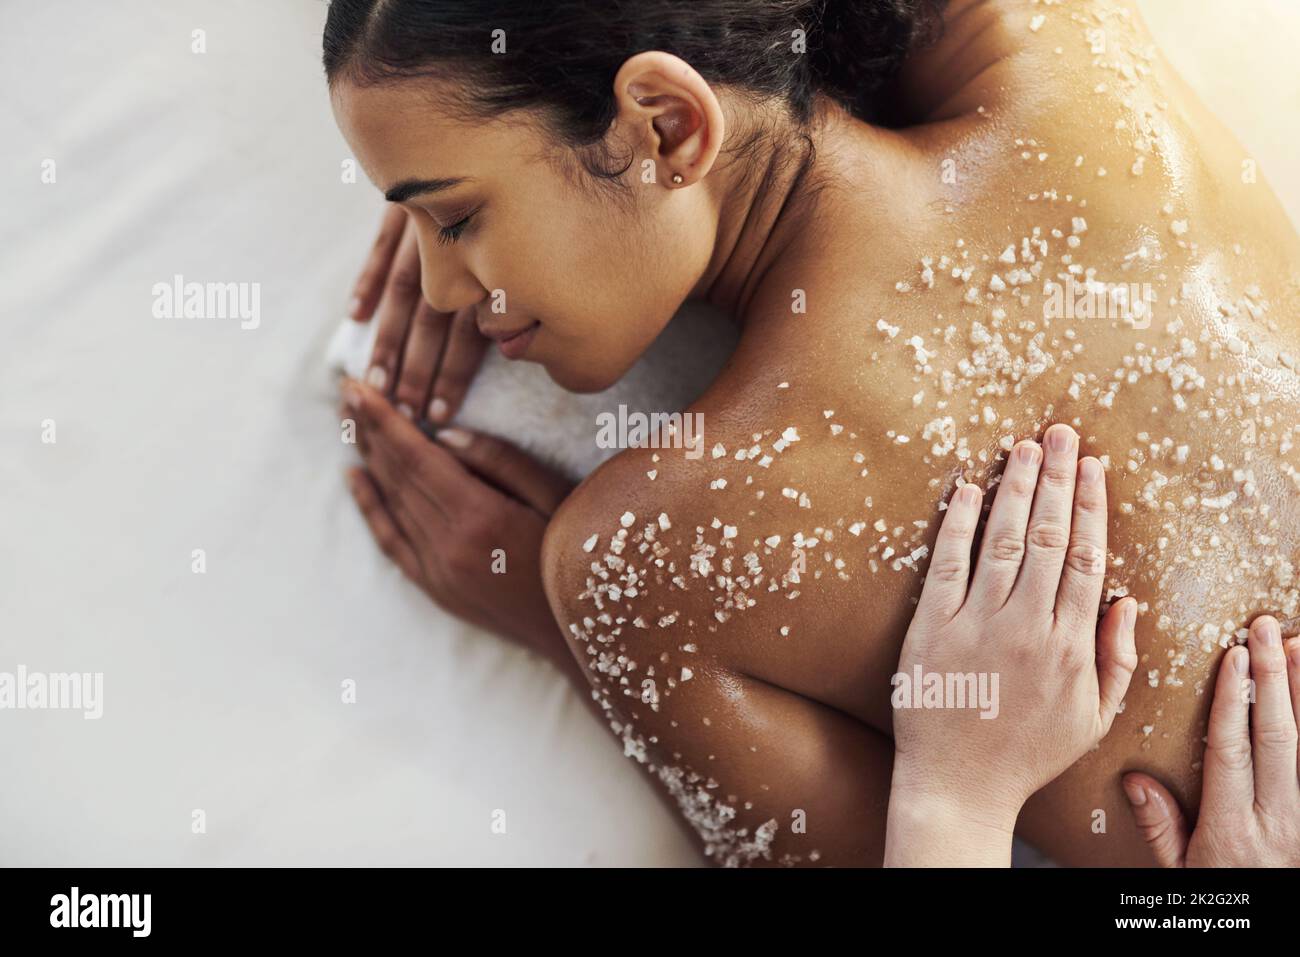 Scrubbing away dead skin to reveal a new you. Shot of a young woman getting an exfoliating massage at a spa. Stock Photo